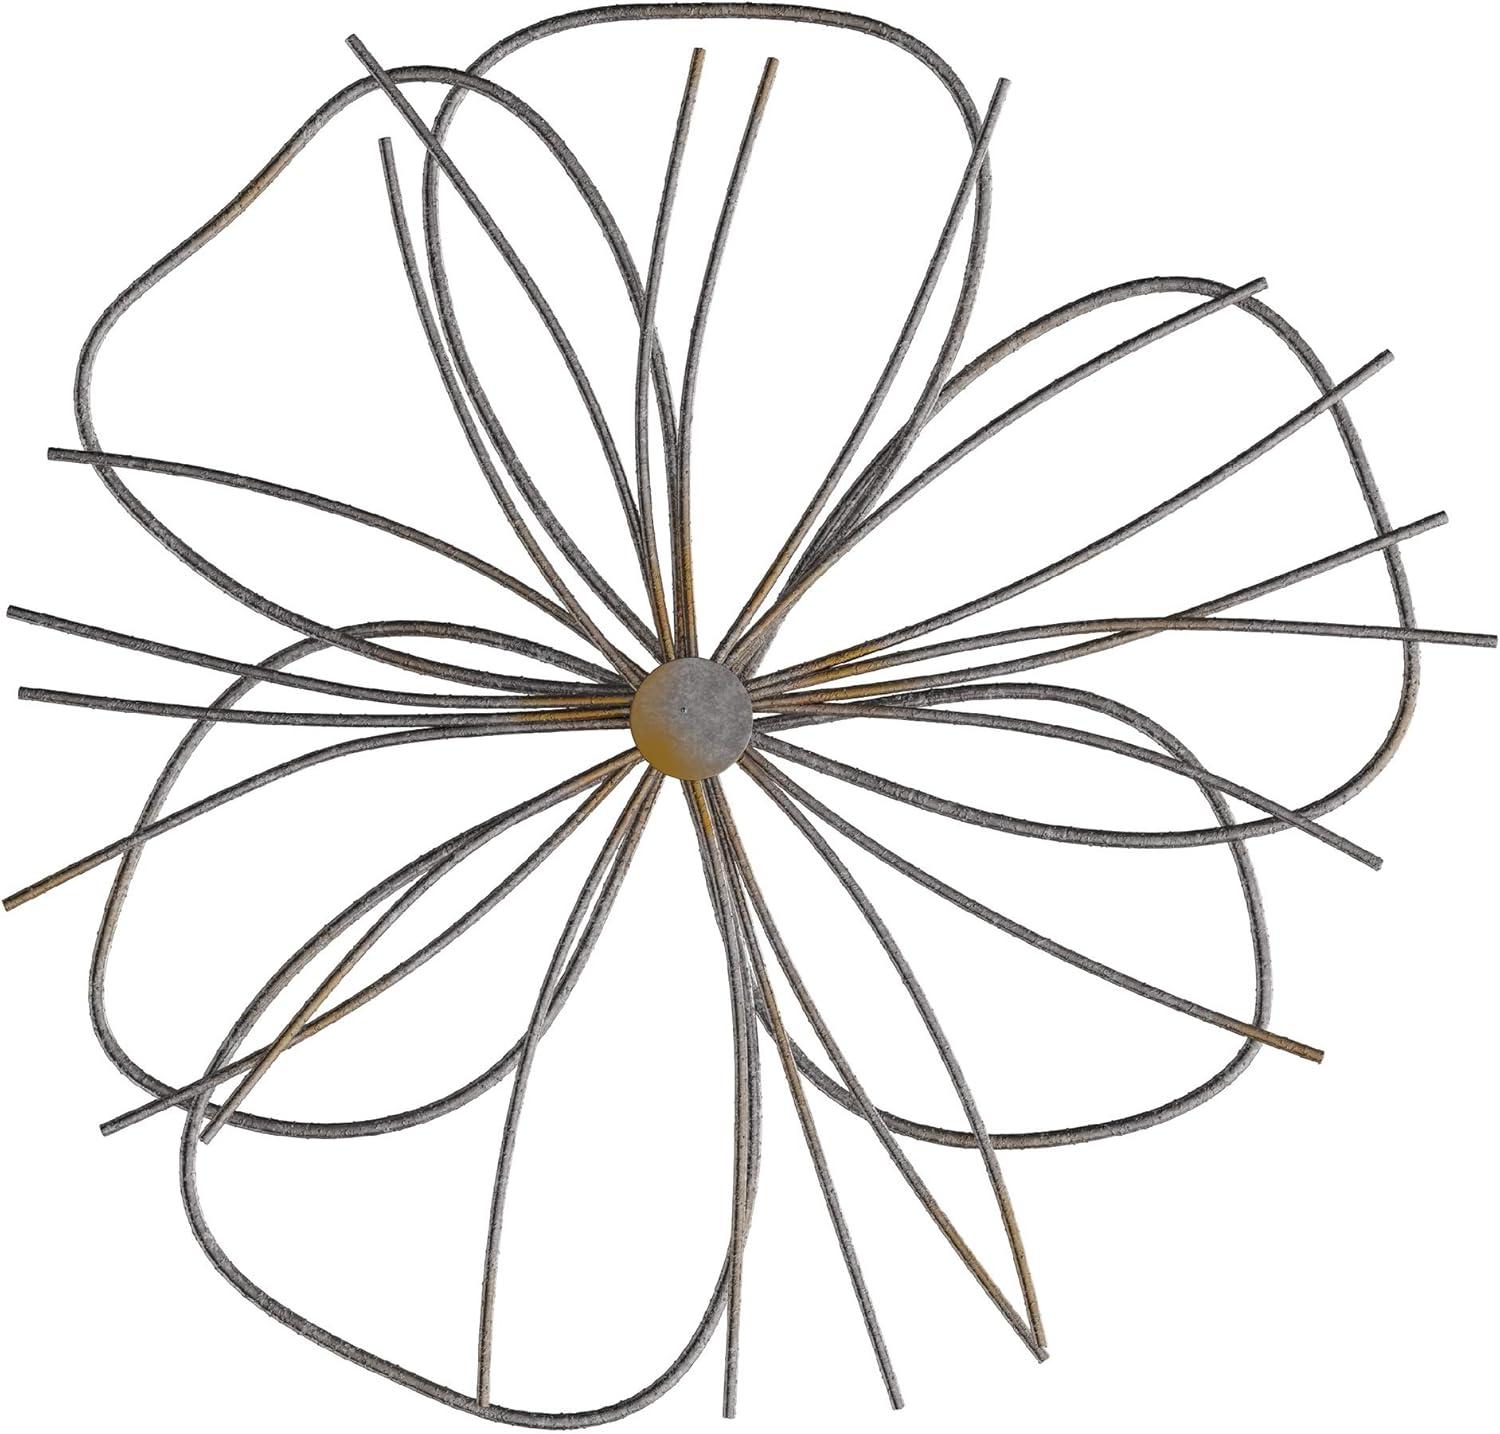 Contemporary Silver & Gold Wire Flower Wall Sculpture